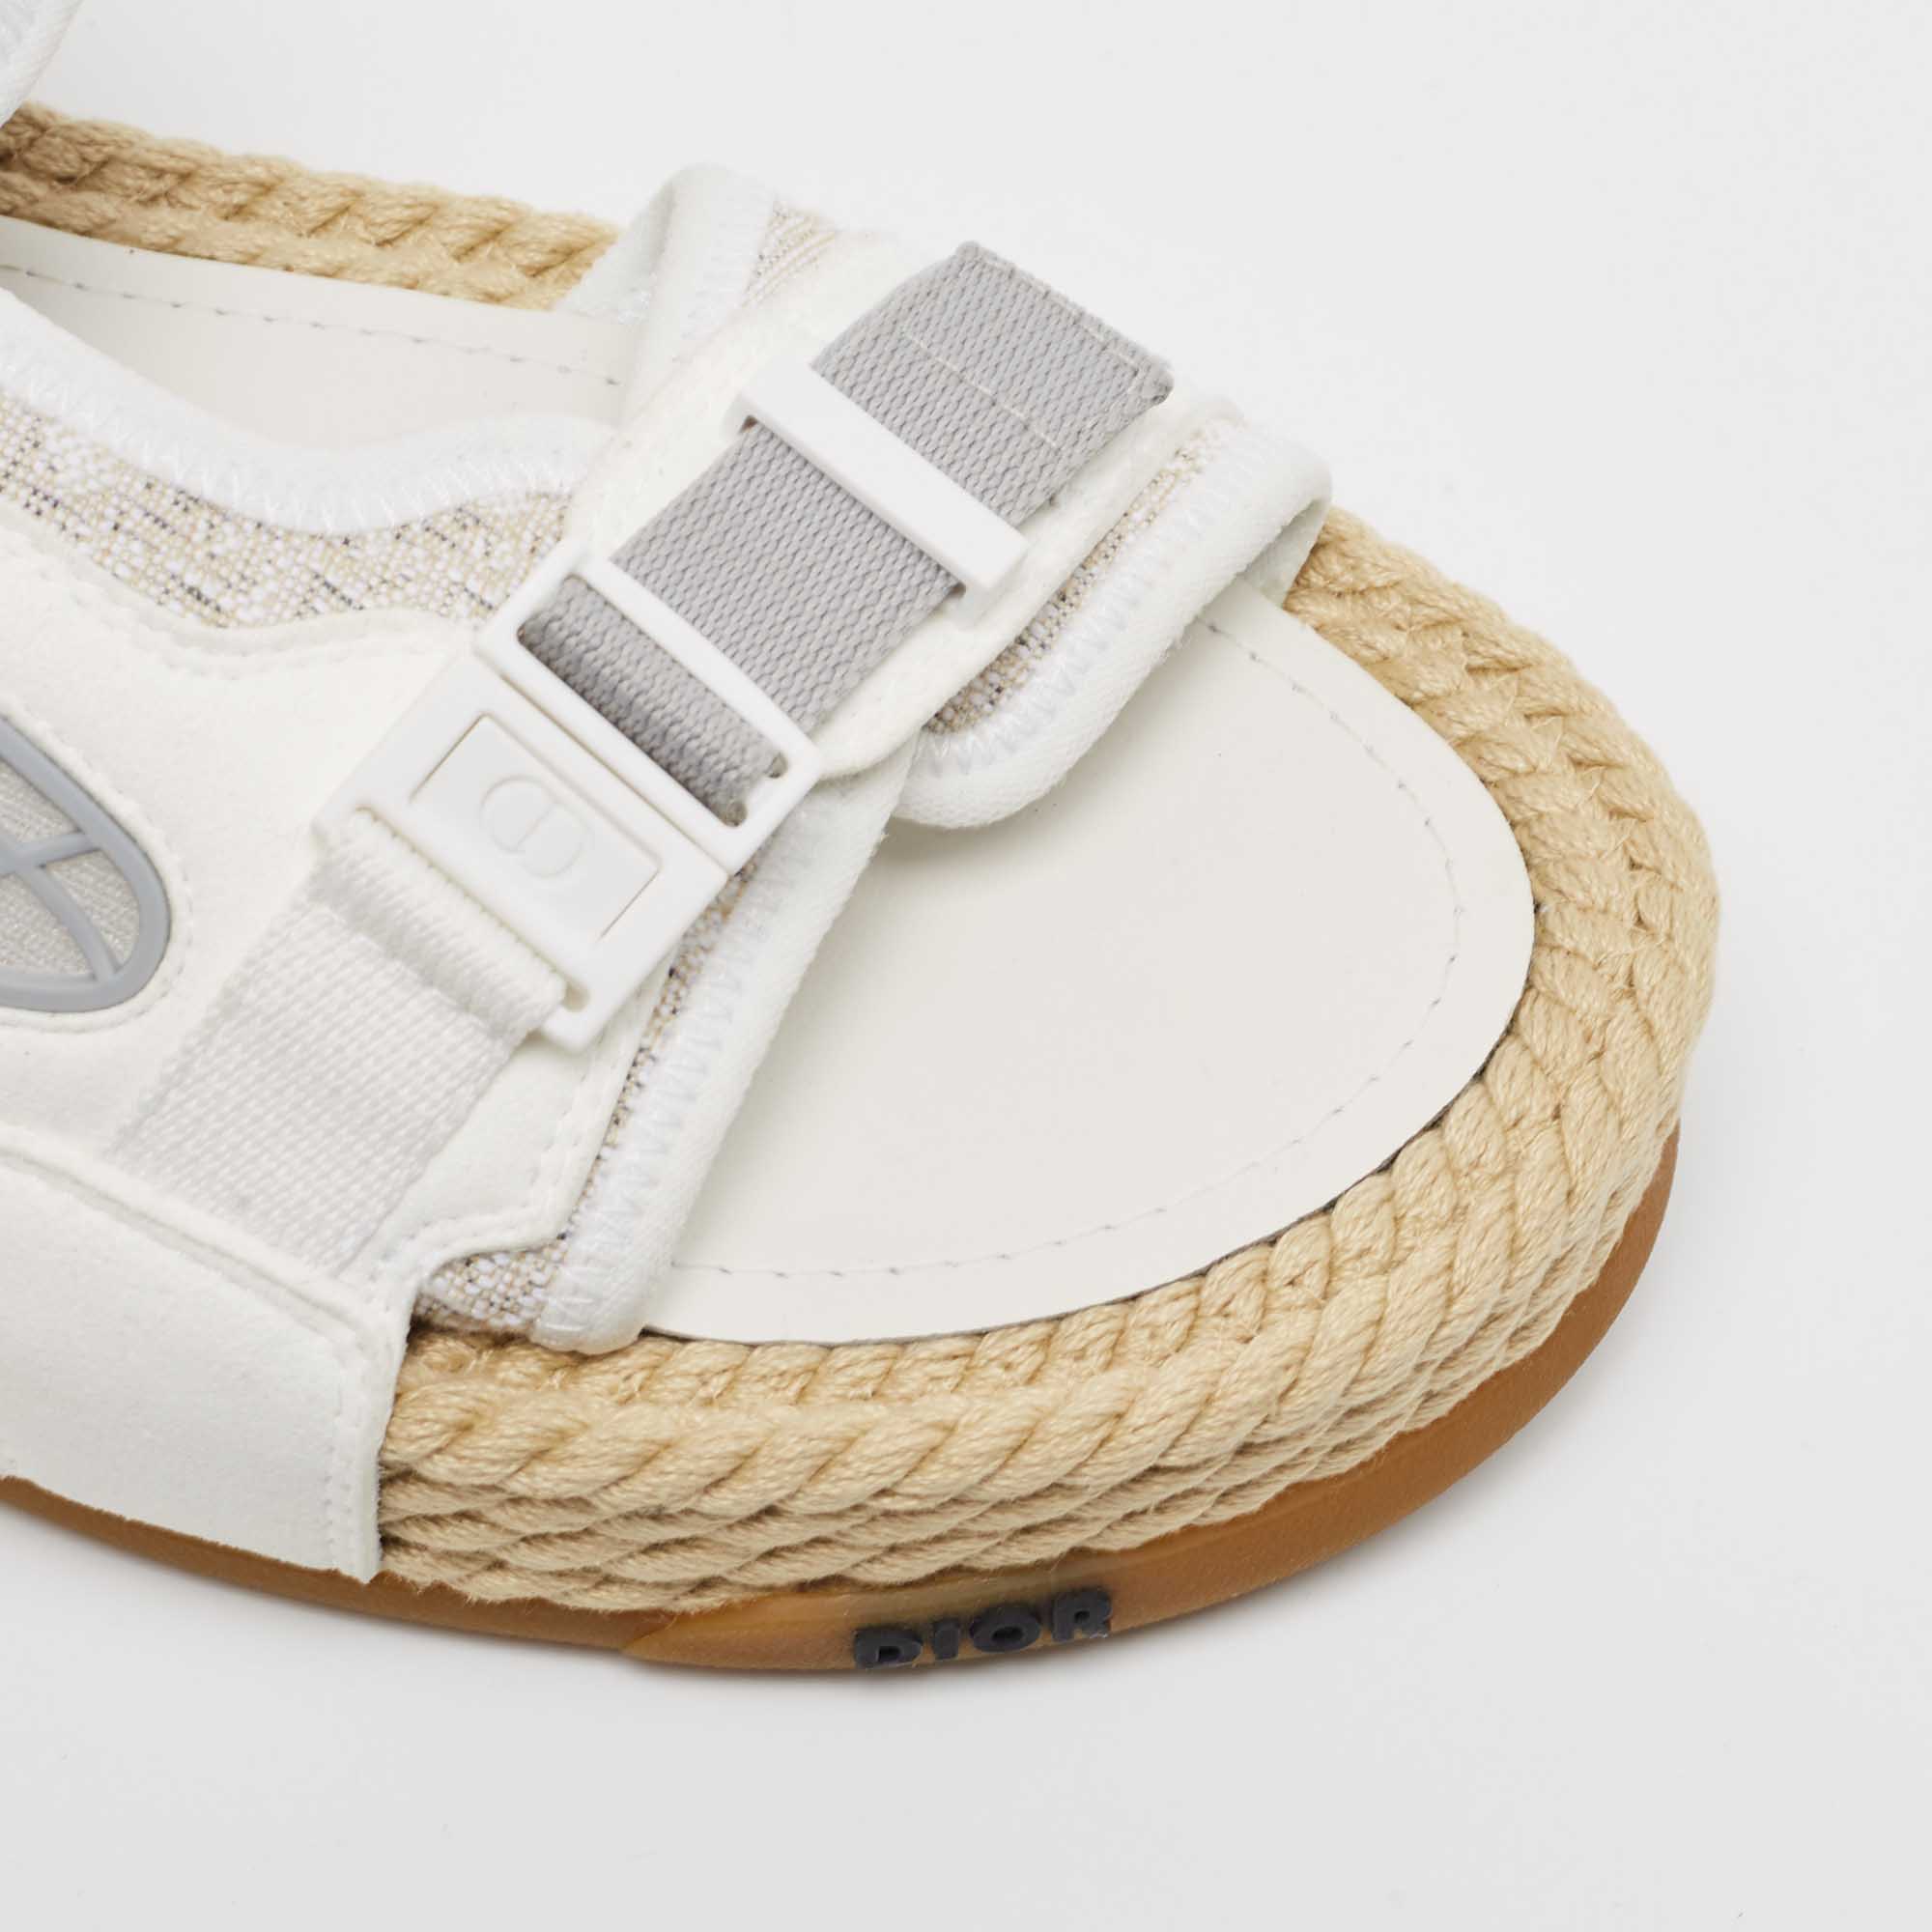 Dior White Canvas And Suede Atlas Sandals Size 41